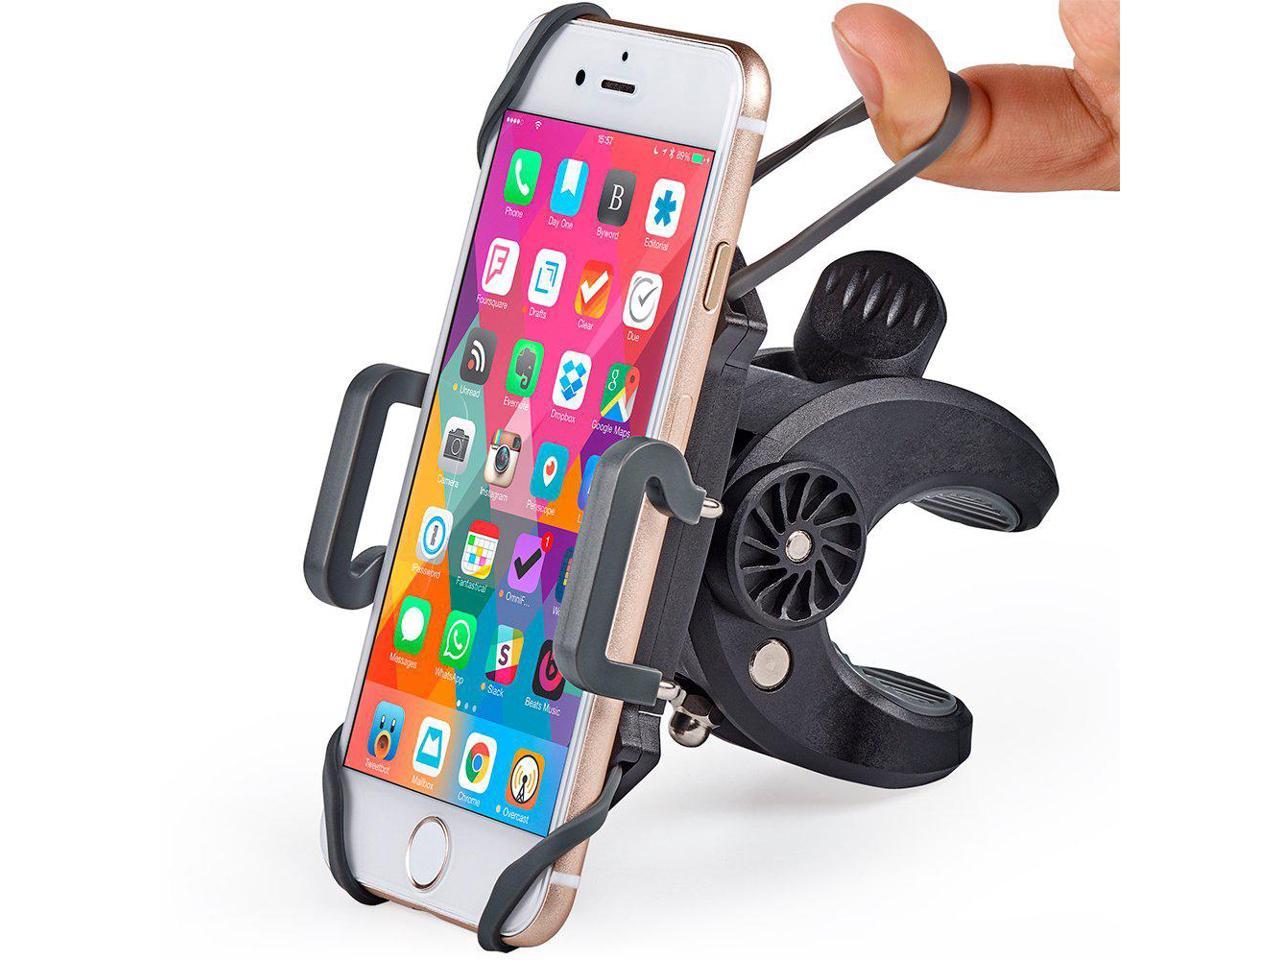 Samsung Galaxy or Any Cell Phone Universal Handlebar Holder for ATV +100 to Safeness & Comfort CAW.CAR Accessories 4332951545 Xr, X, 8, 7, 6, Plus/Max Bicycle and Motorbike for iPhone Xs Bike & Motorcycle Phone Mount 